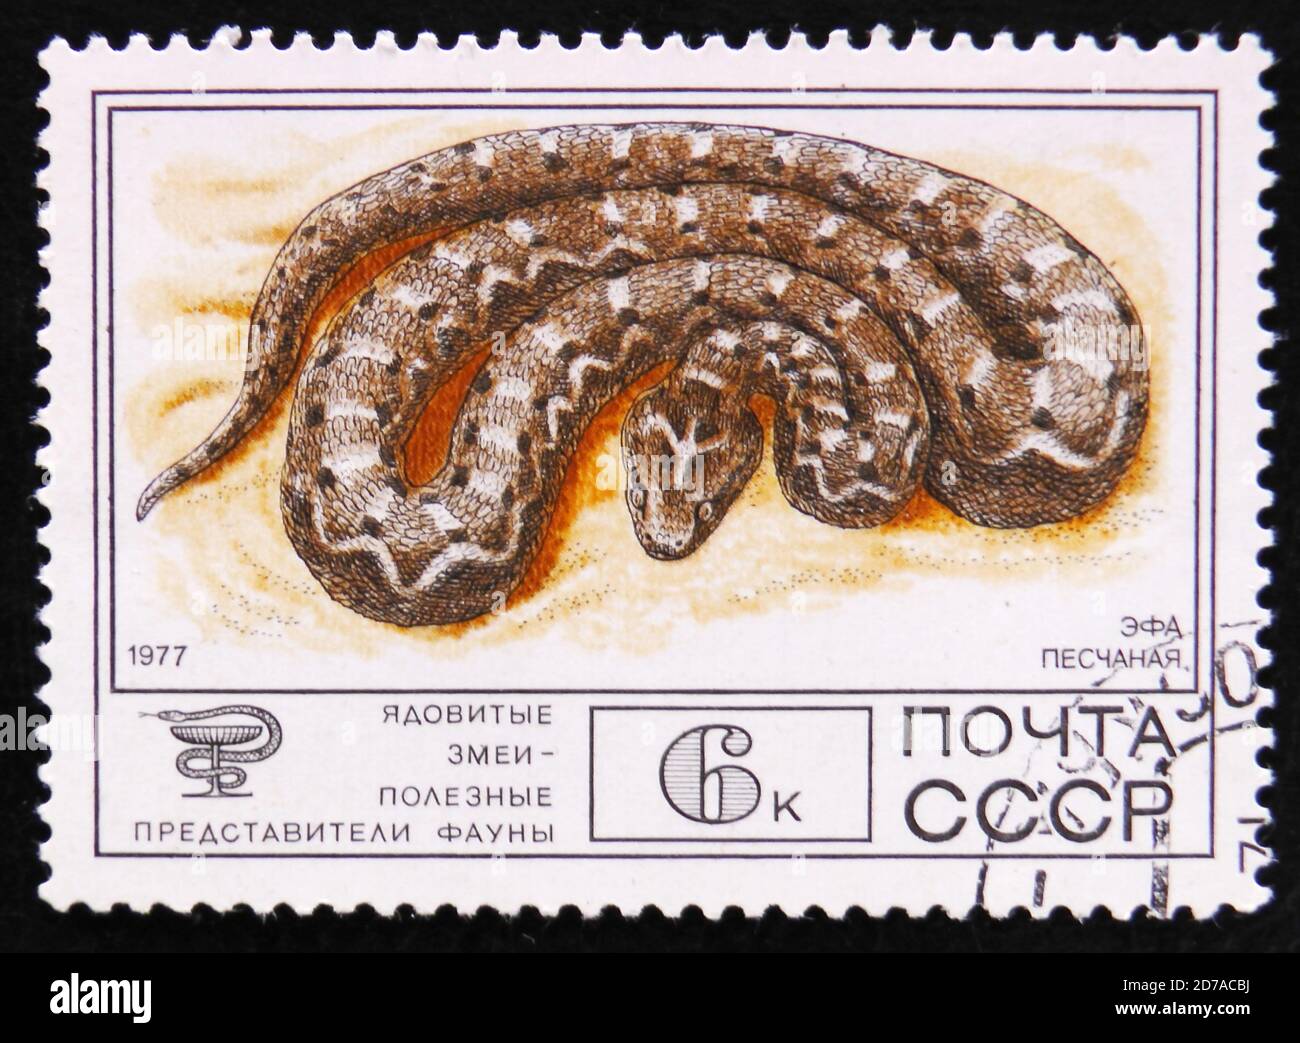 MOSCOW, RUSSIA - APRIL 2, 2017: A post stamp printed in Soviet Union shows Saw-scaled viper, Echis carinatus, circa 1977 Stock Photo